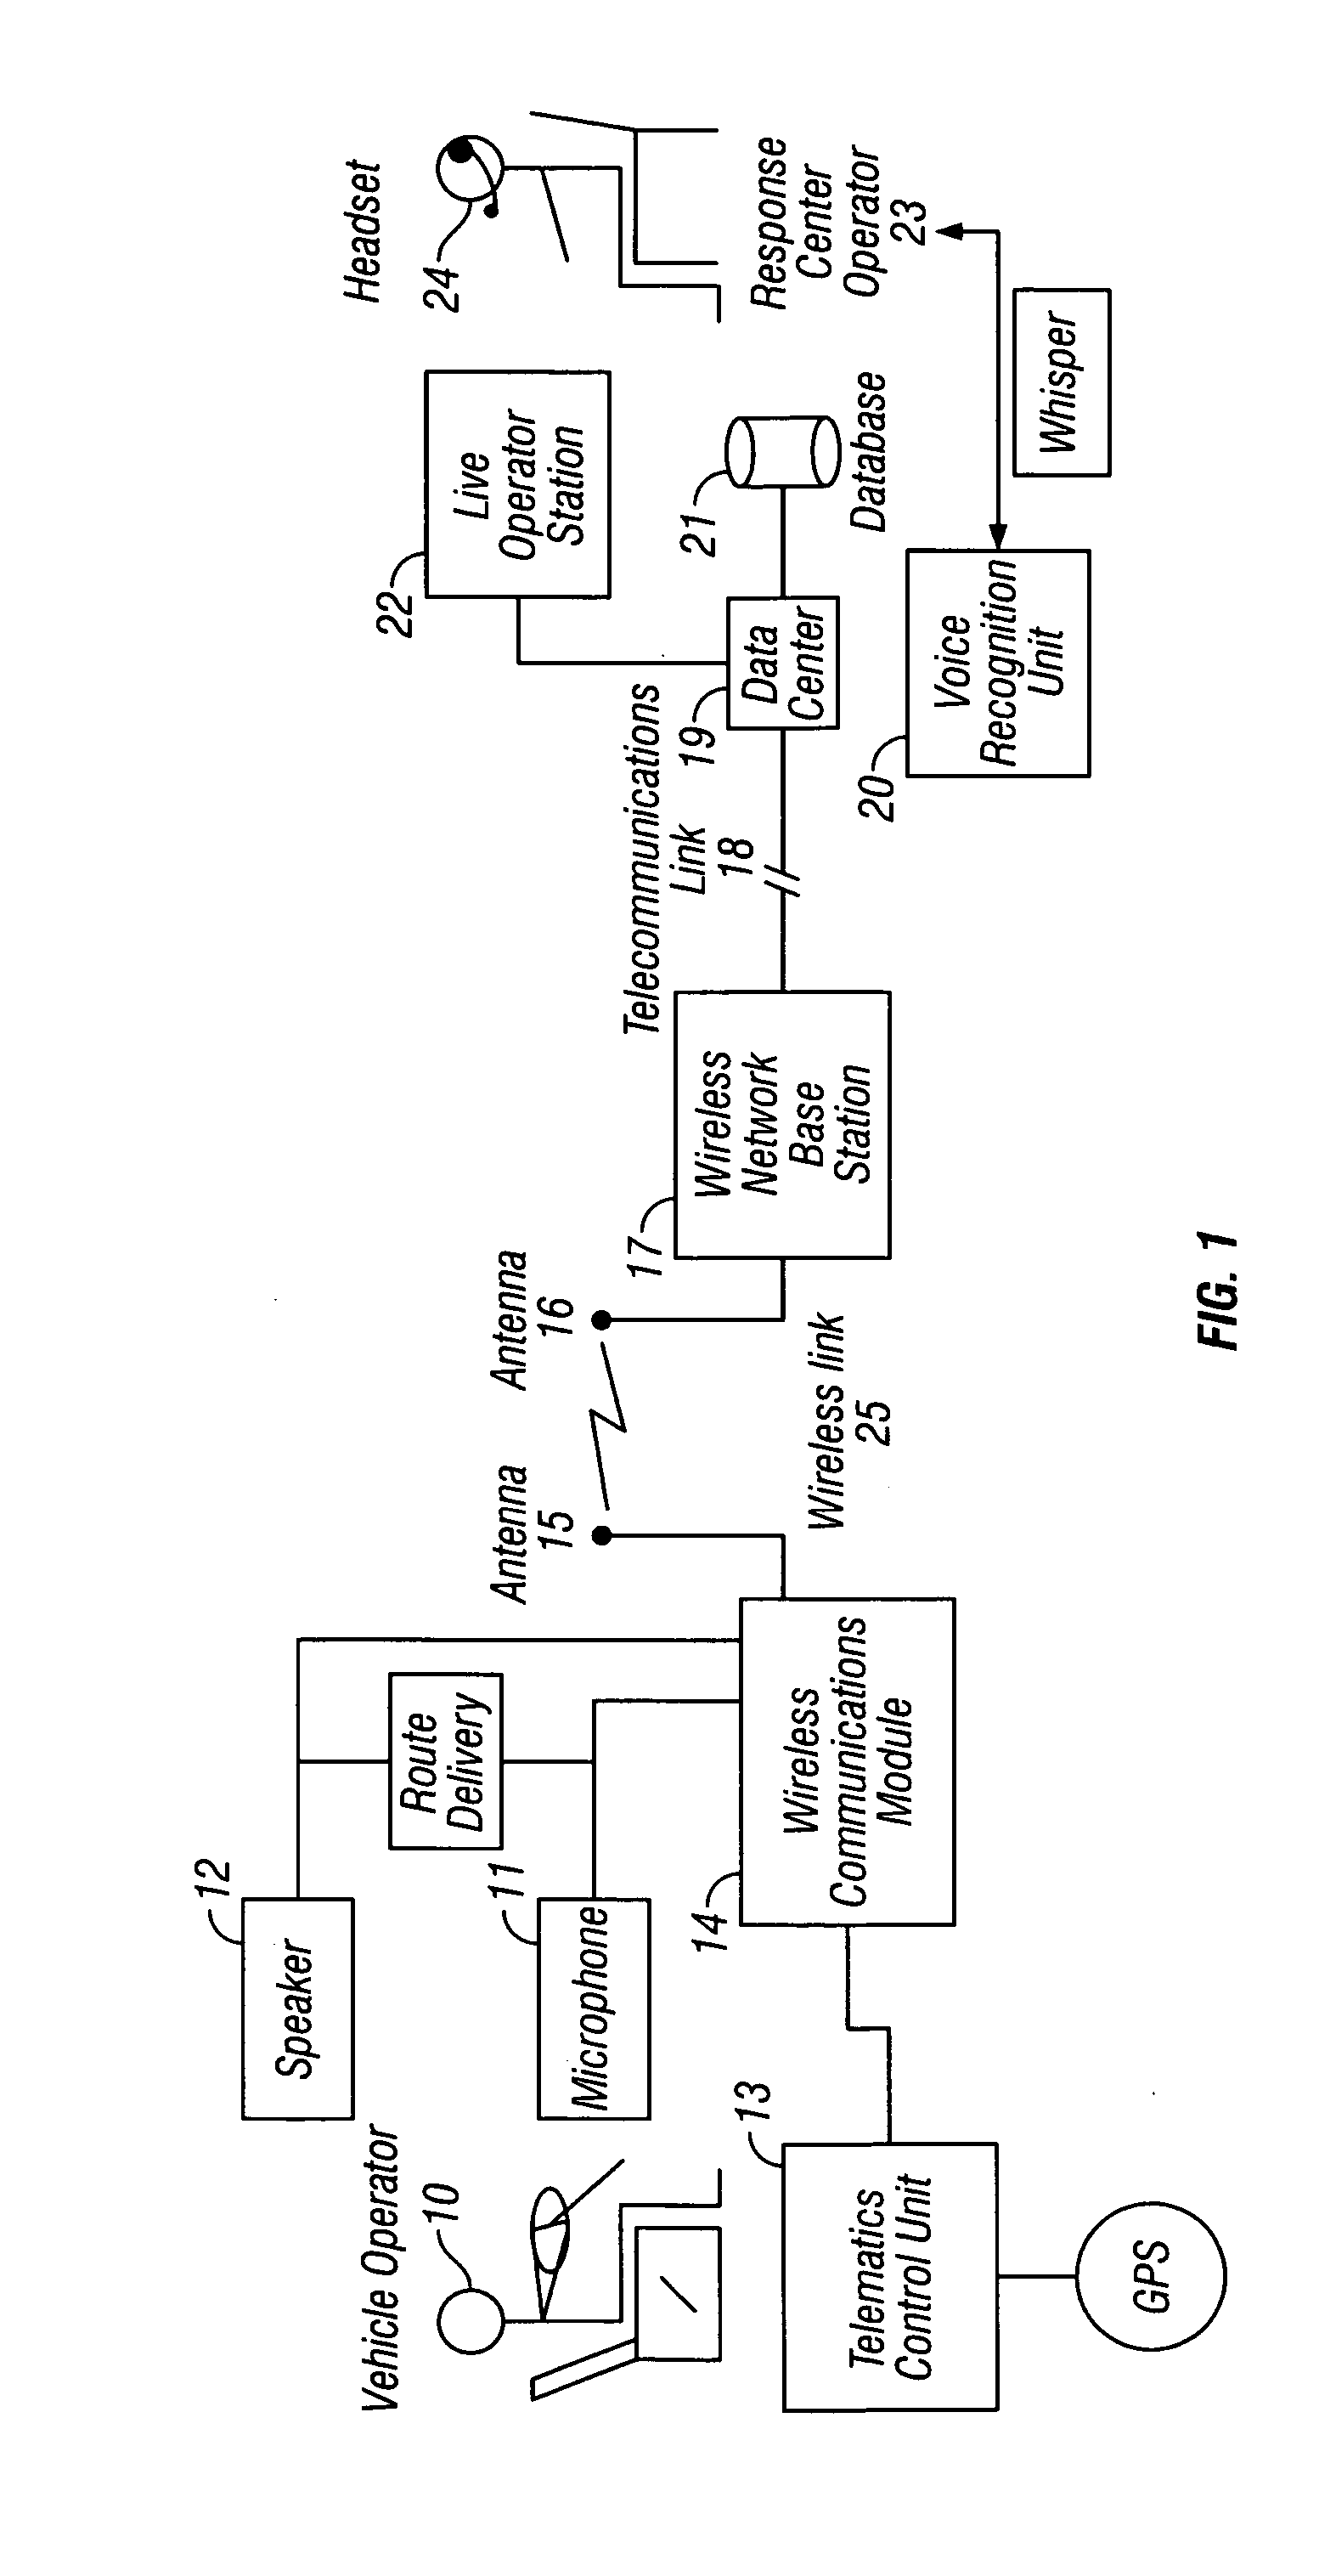 Systems and methods for off-board voice-automated vehicle navigation